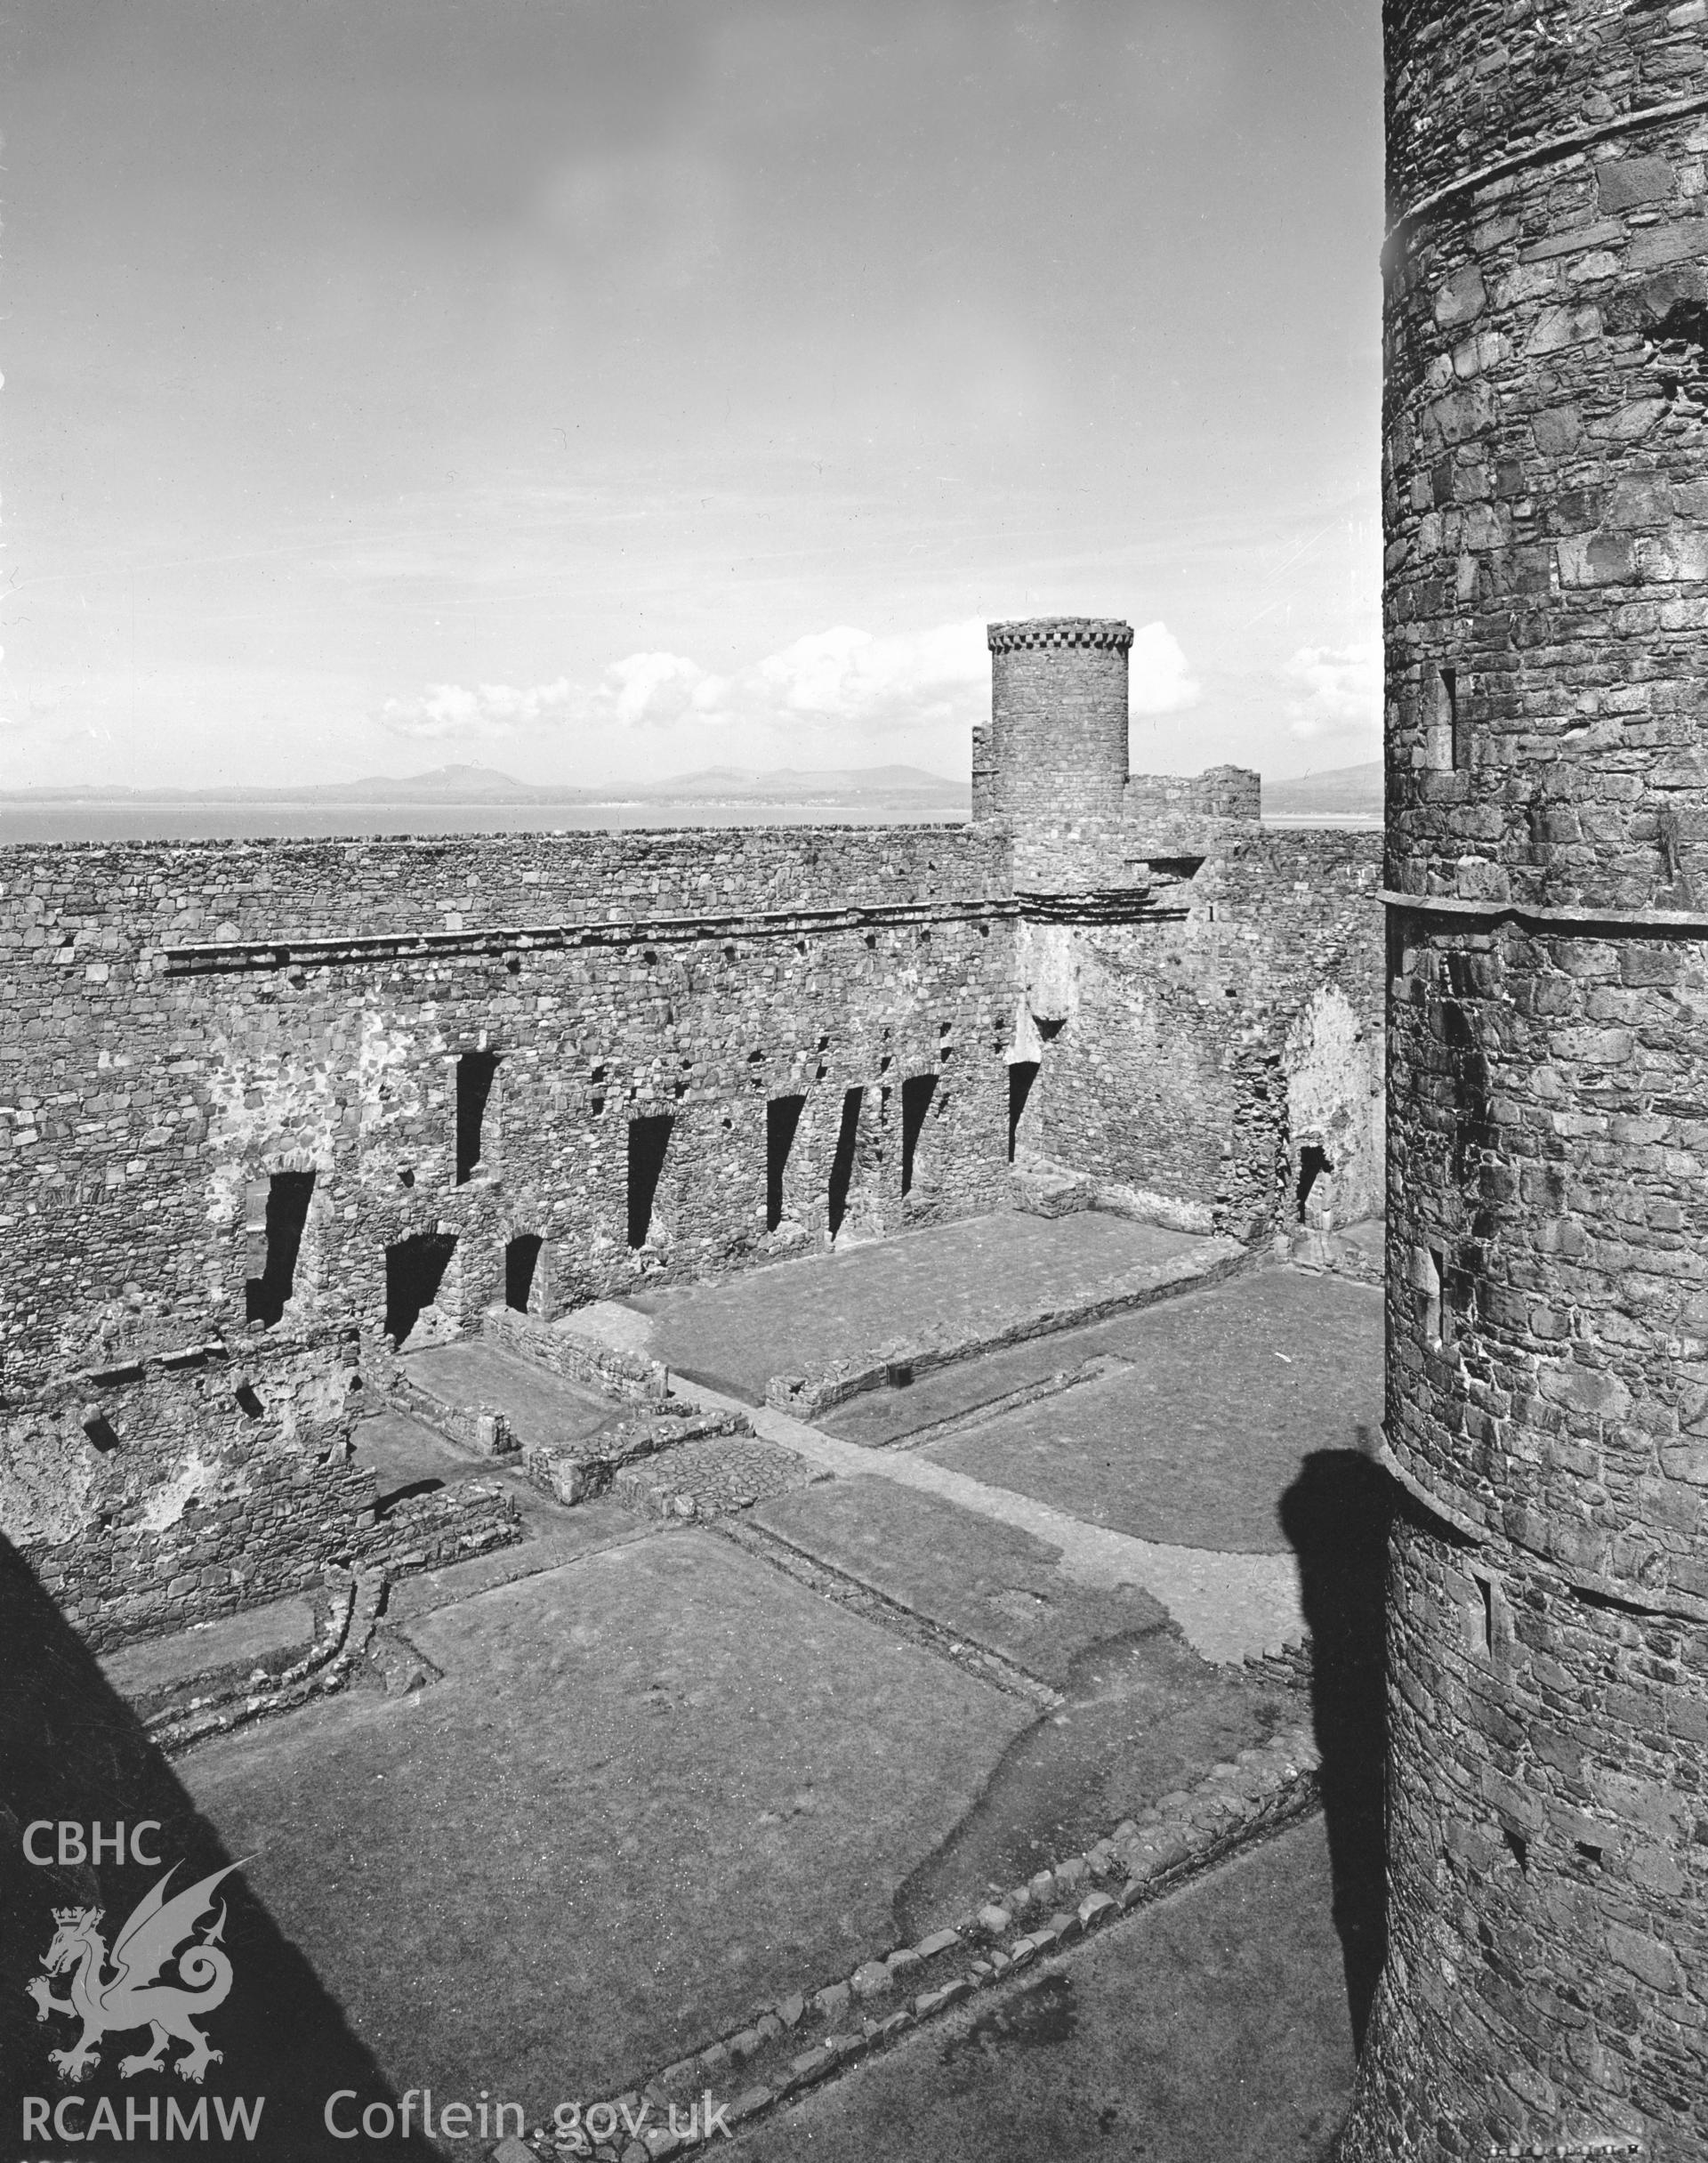 Digital copy of a nitrate negative showing view of Harlech Castle dated 1947.